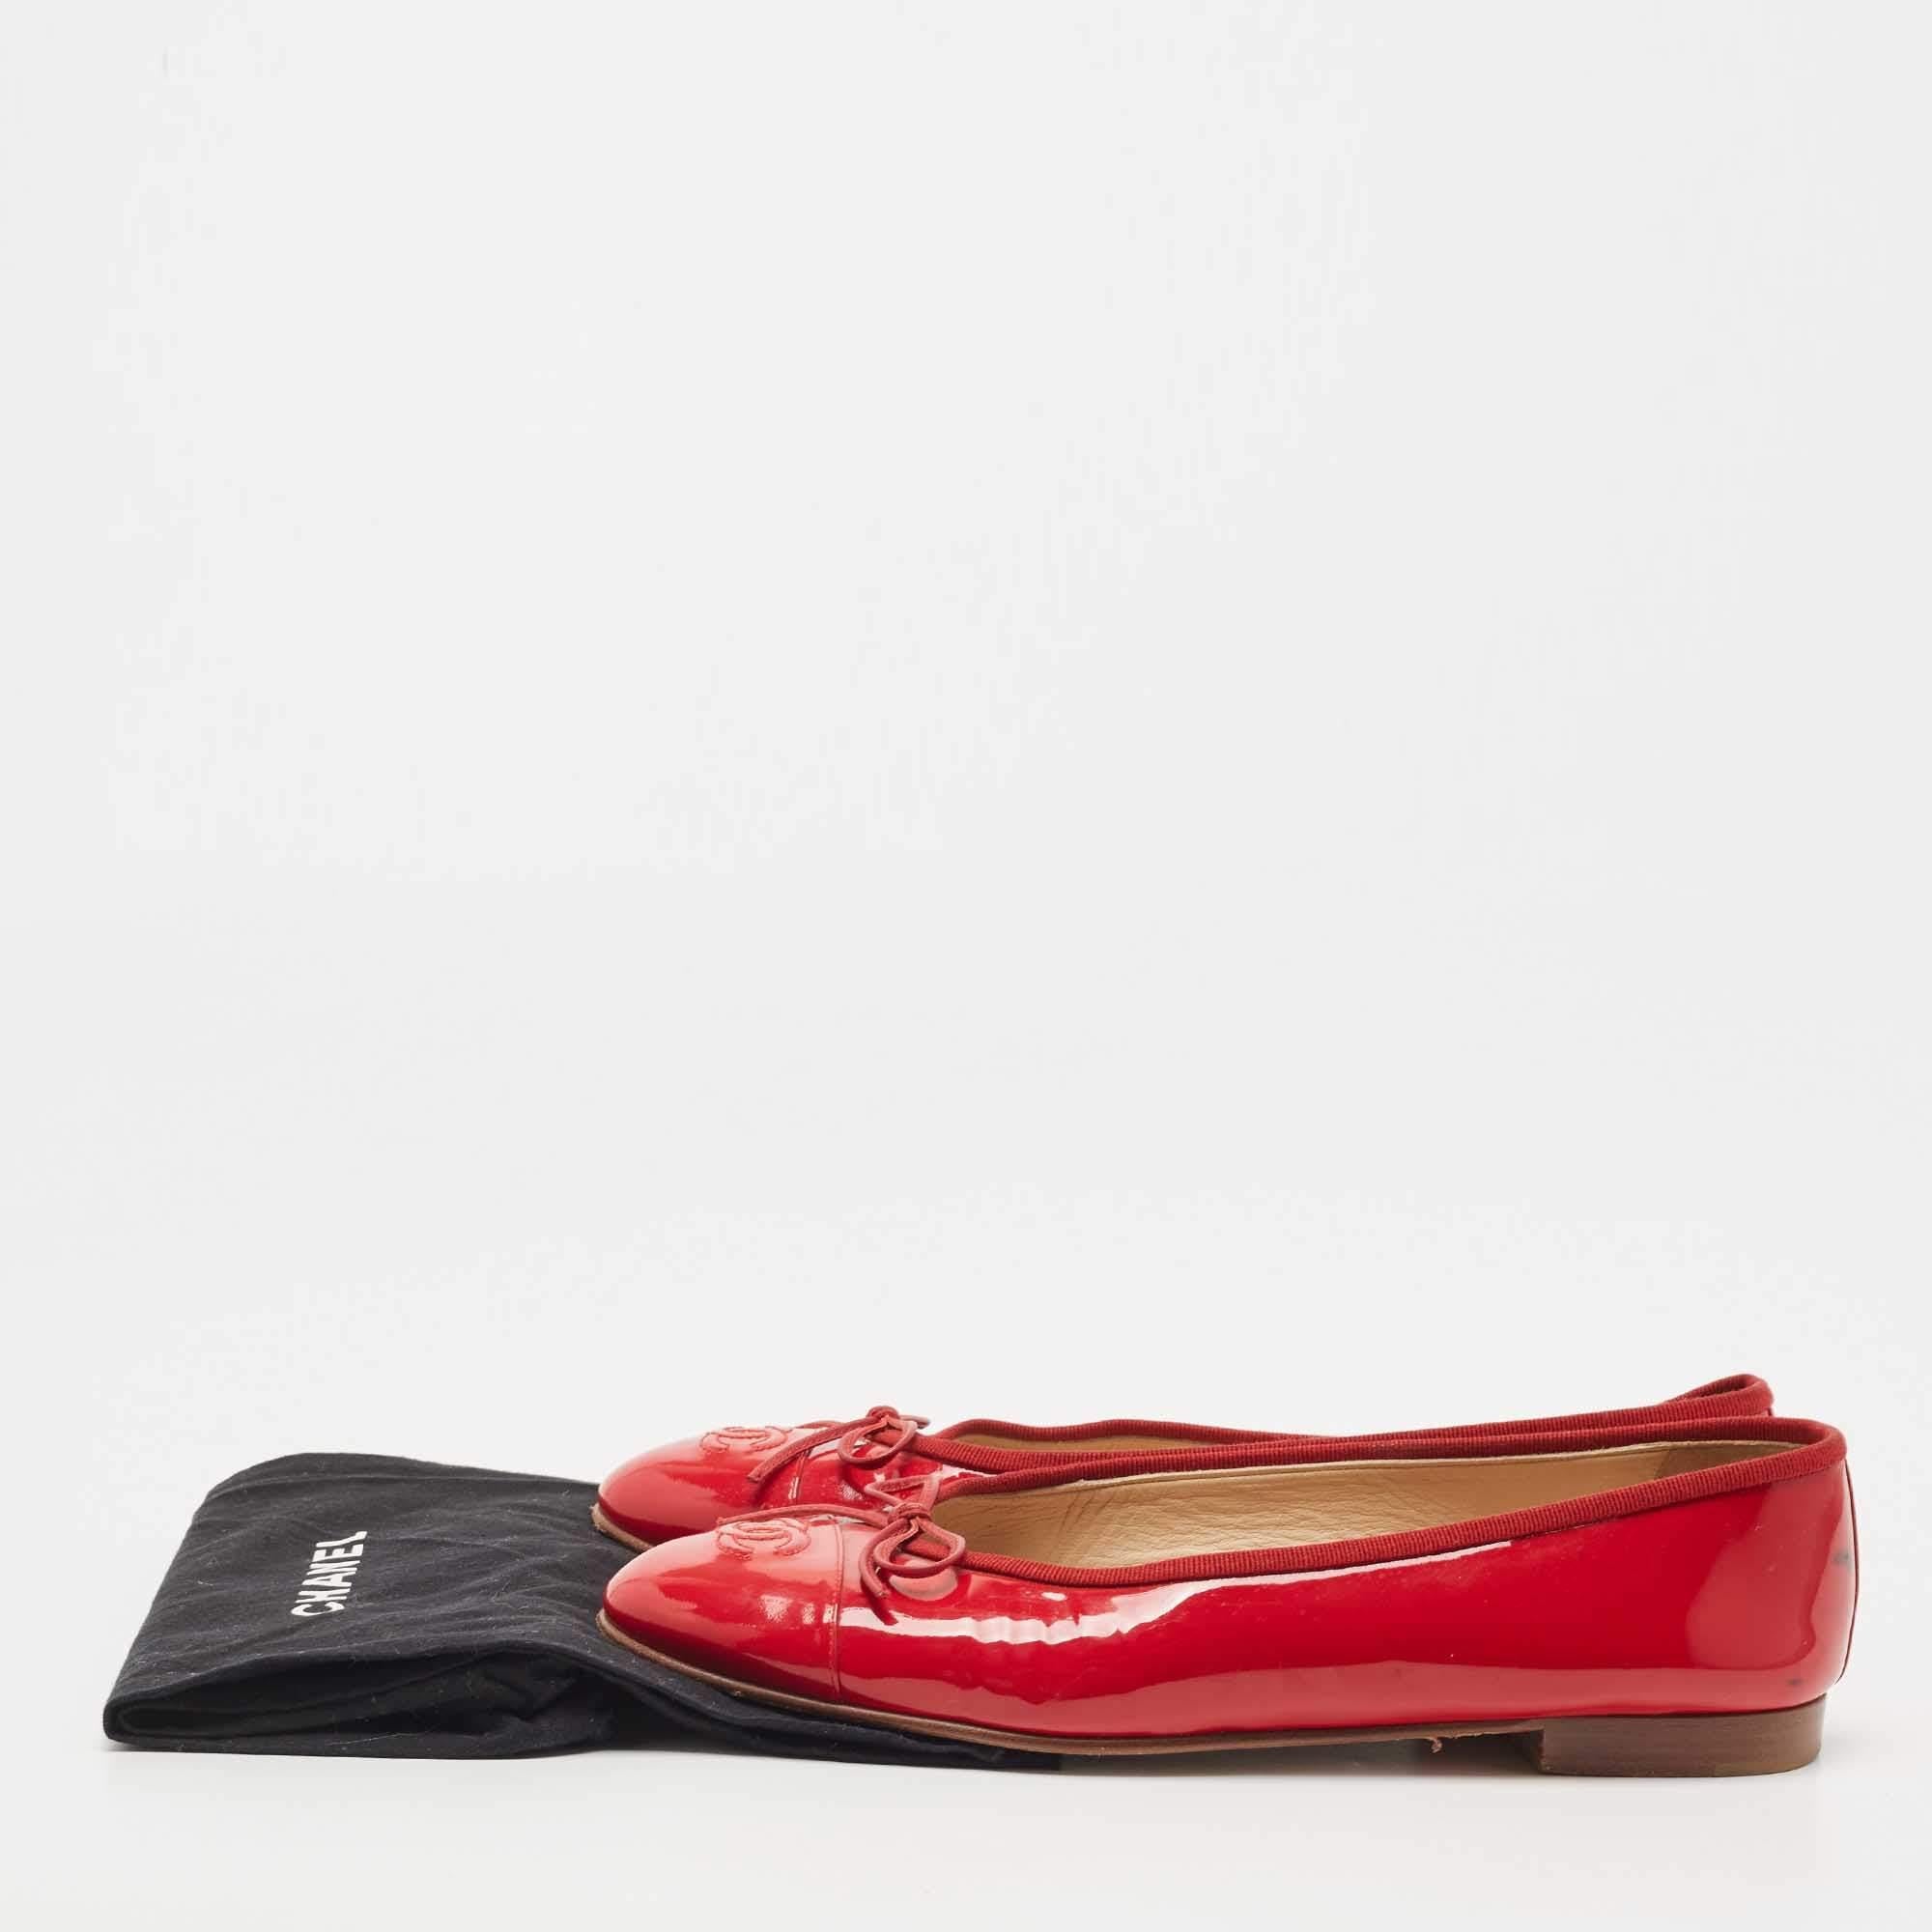 Chanel Red Patent Leather CC Bow Ballet Flats Size 40.5 3